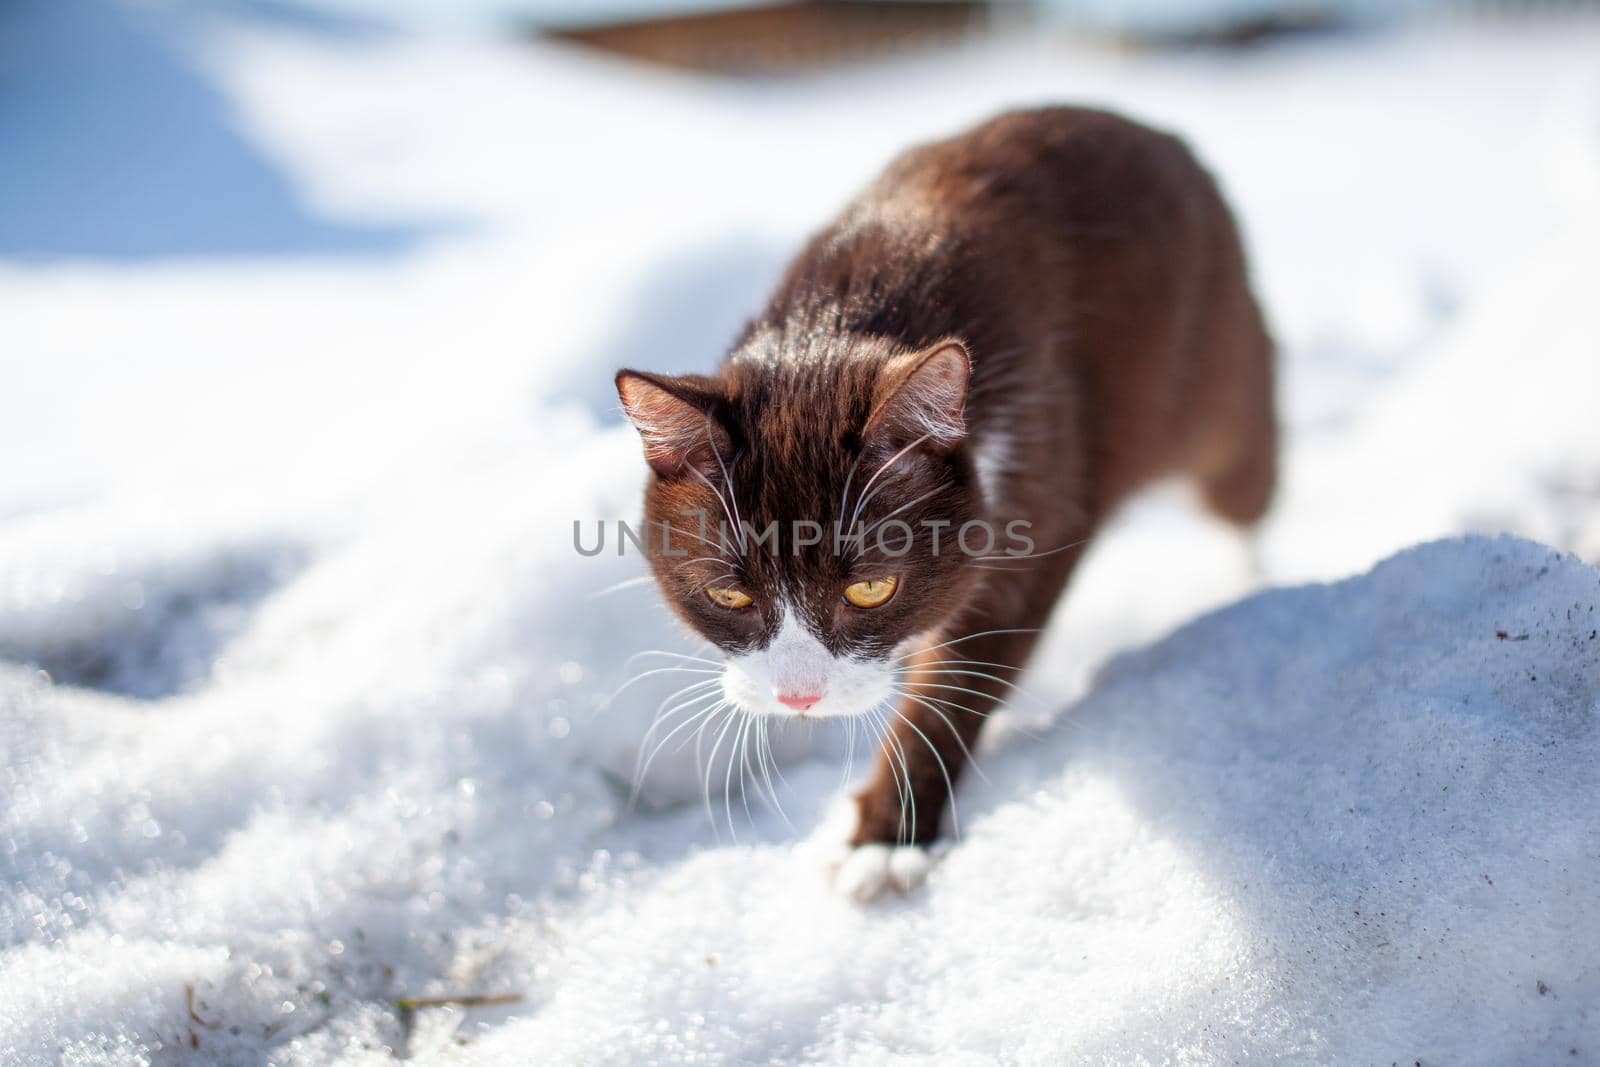 Cute kitten walks in the snow in winter. A brown cat makes its way through the snowdrifts. The pet walks on the white snow in winter.